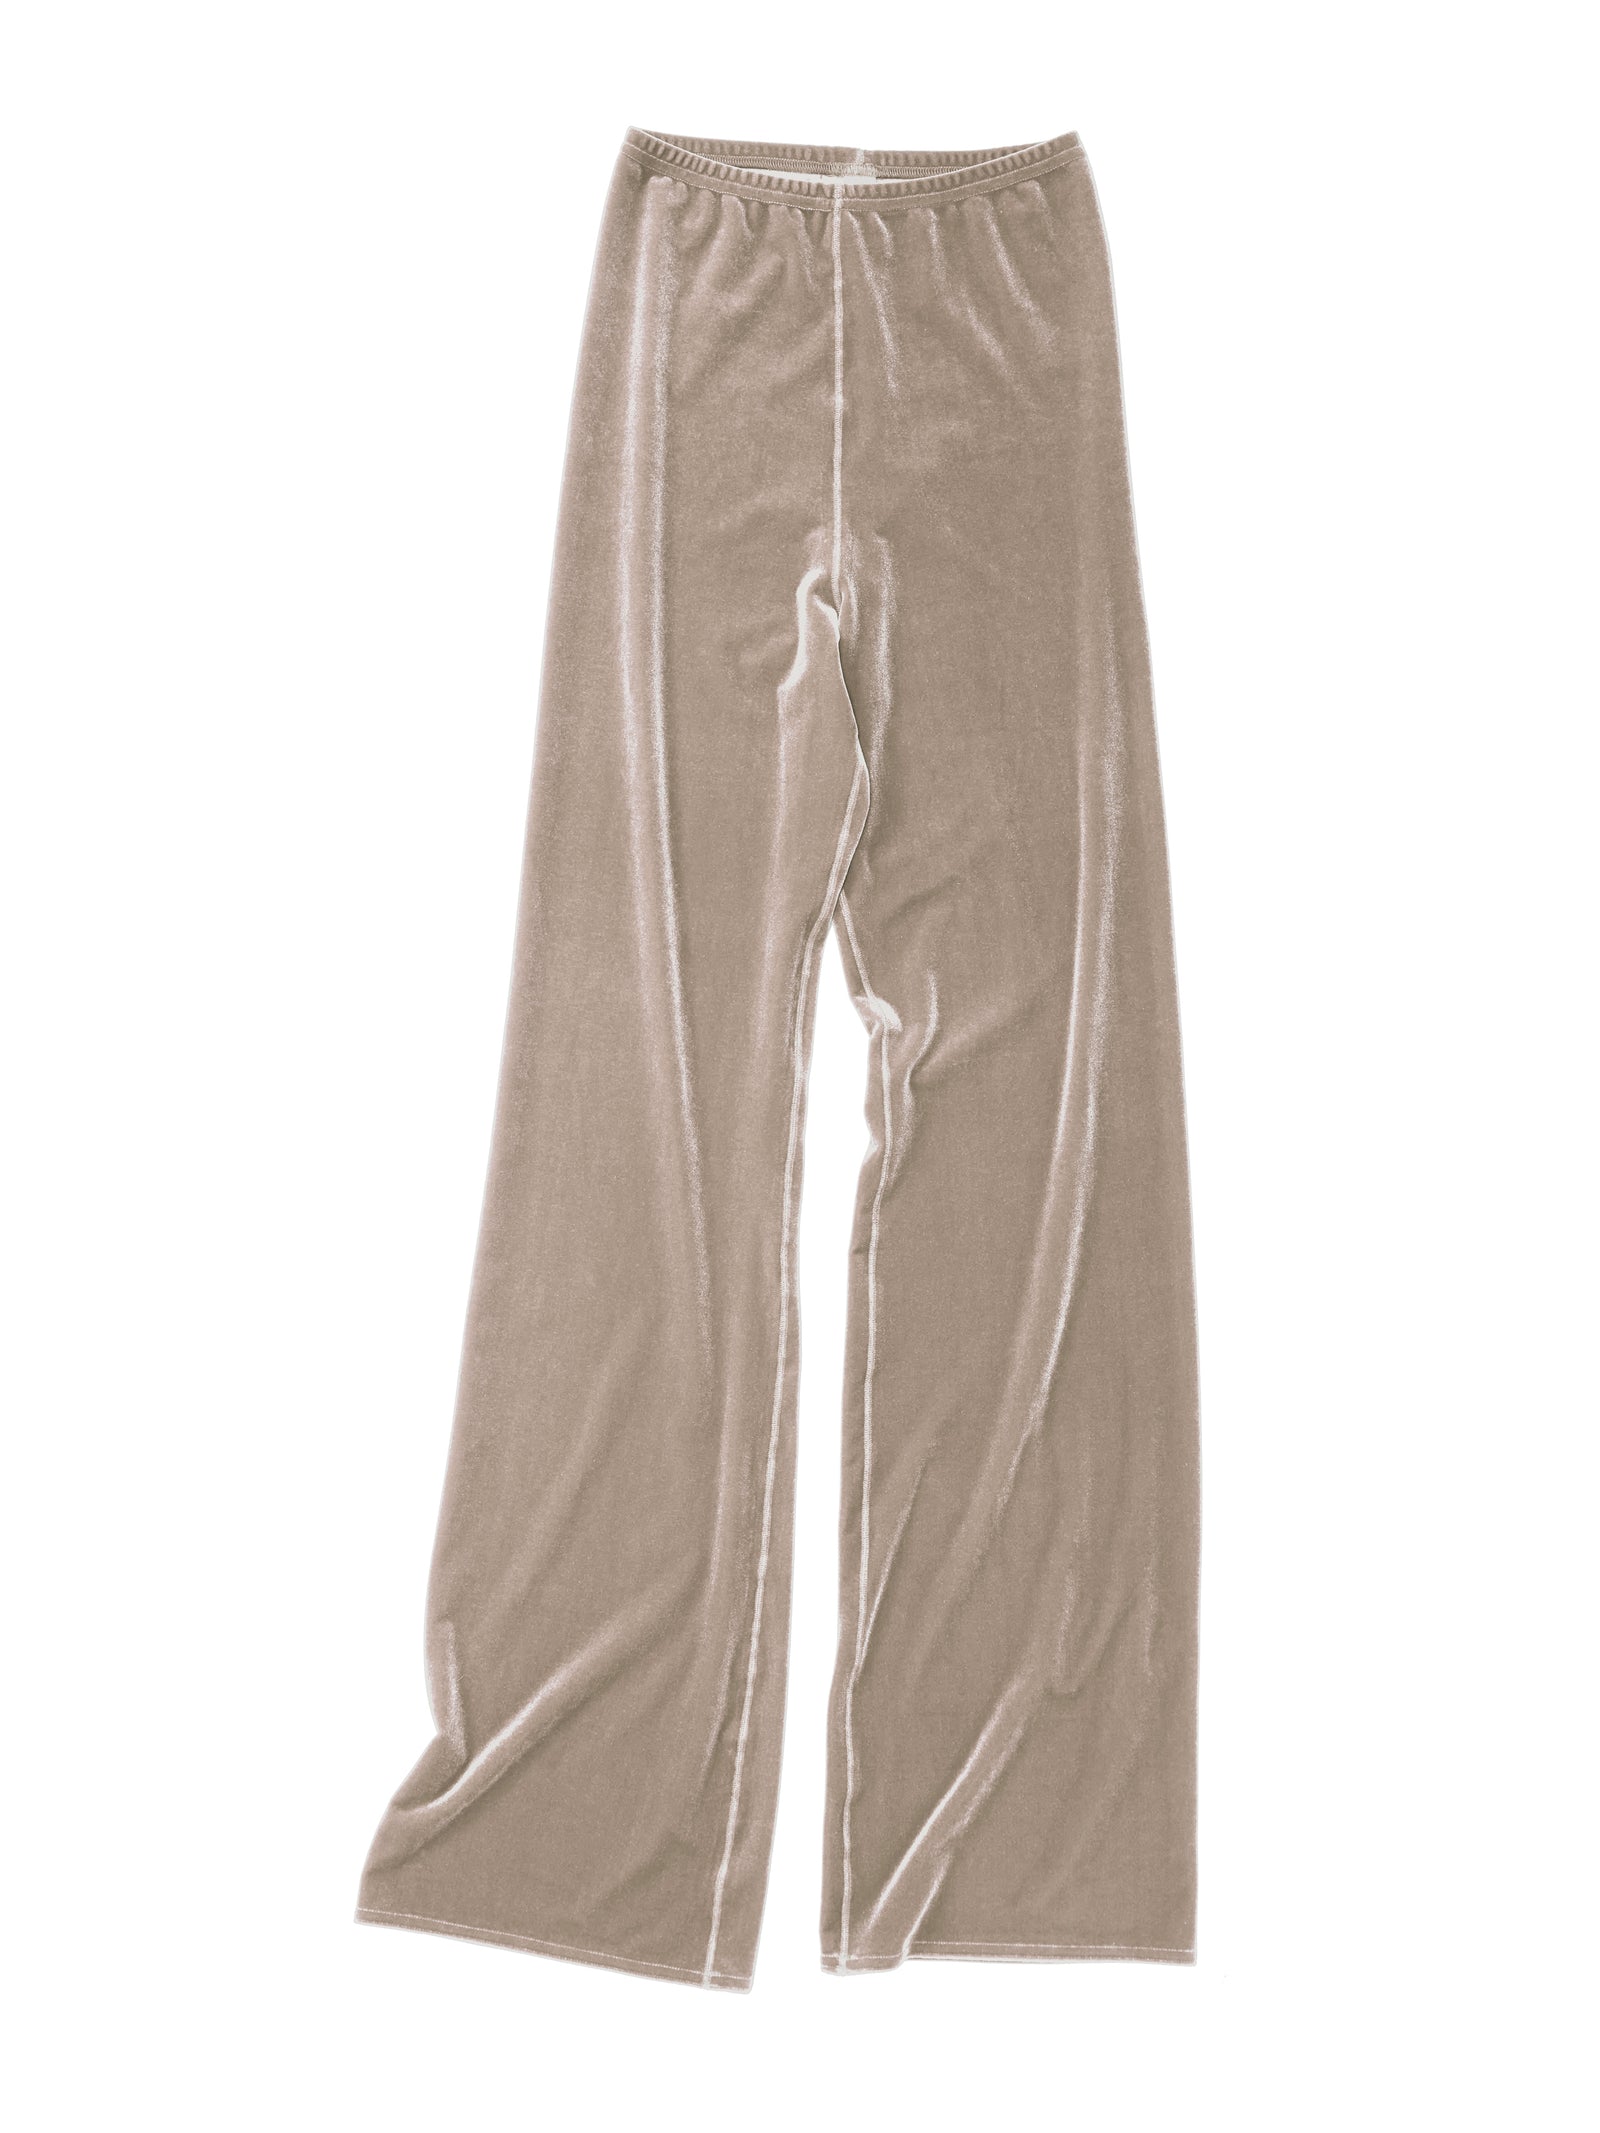 All The Hits High Waist Velvet Pants In Taupe